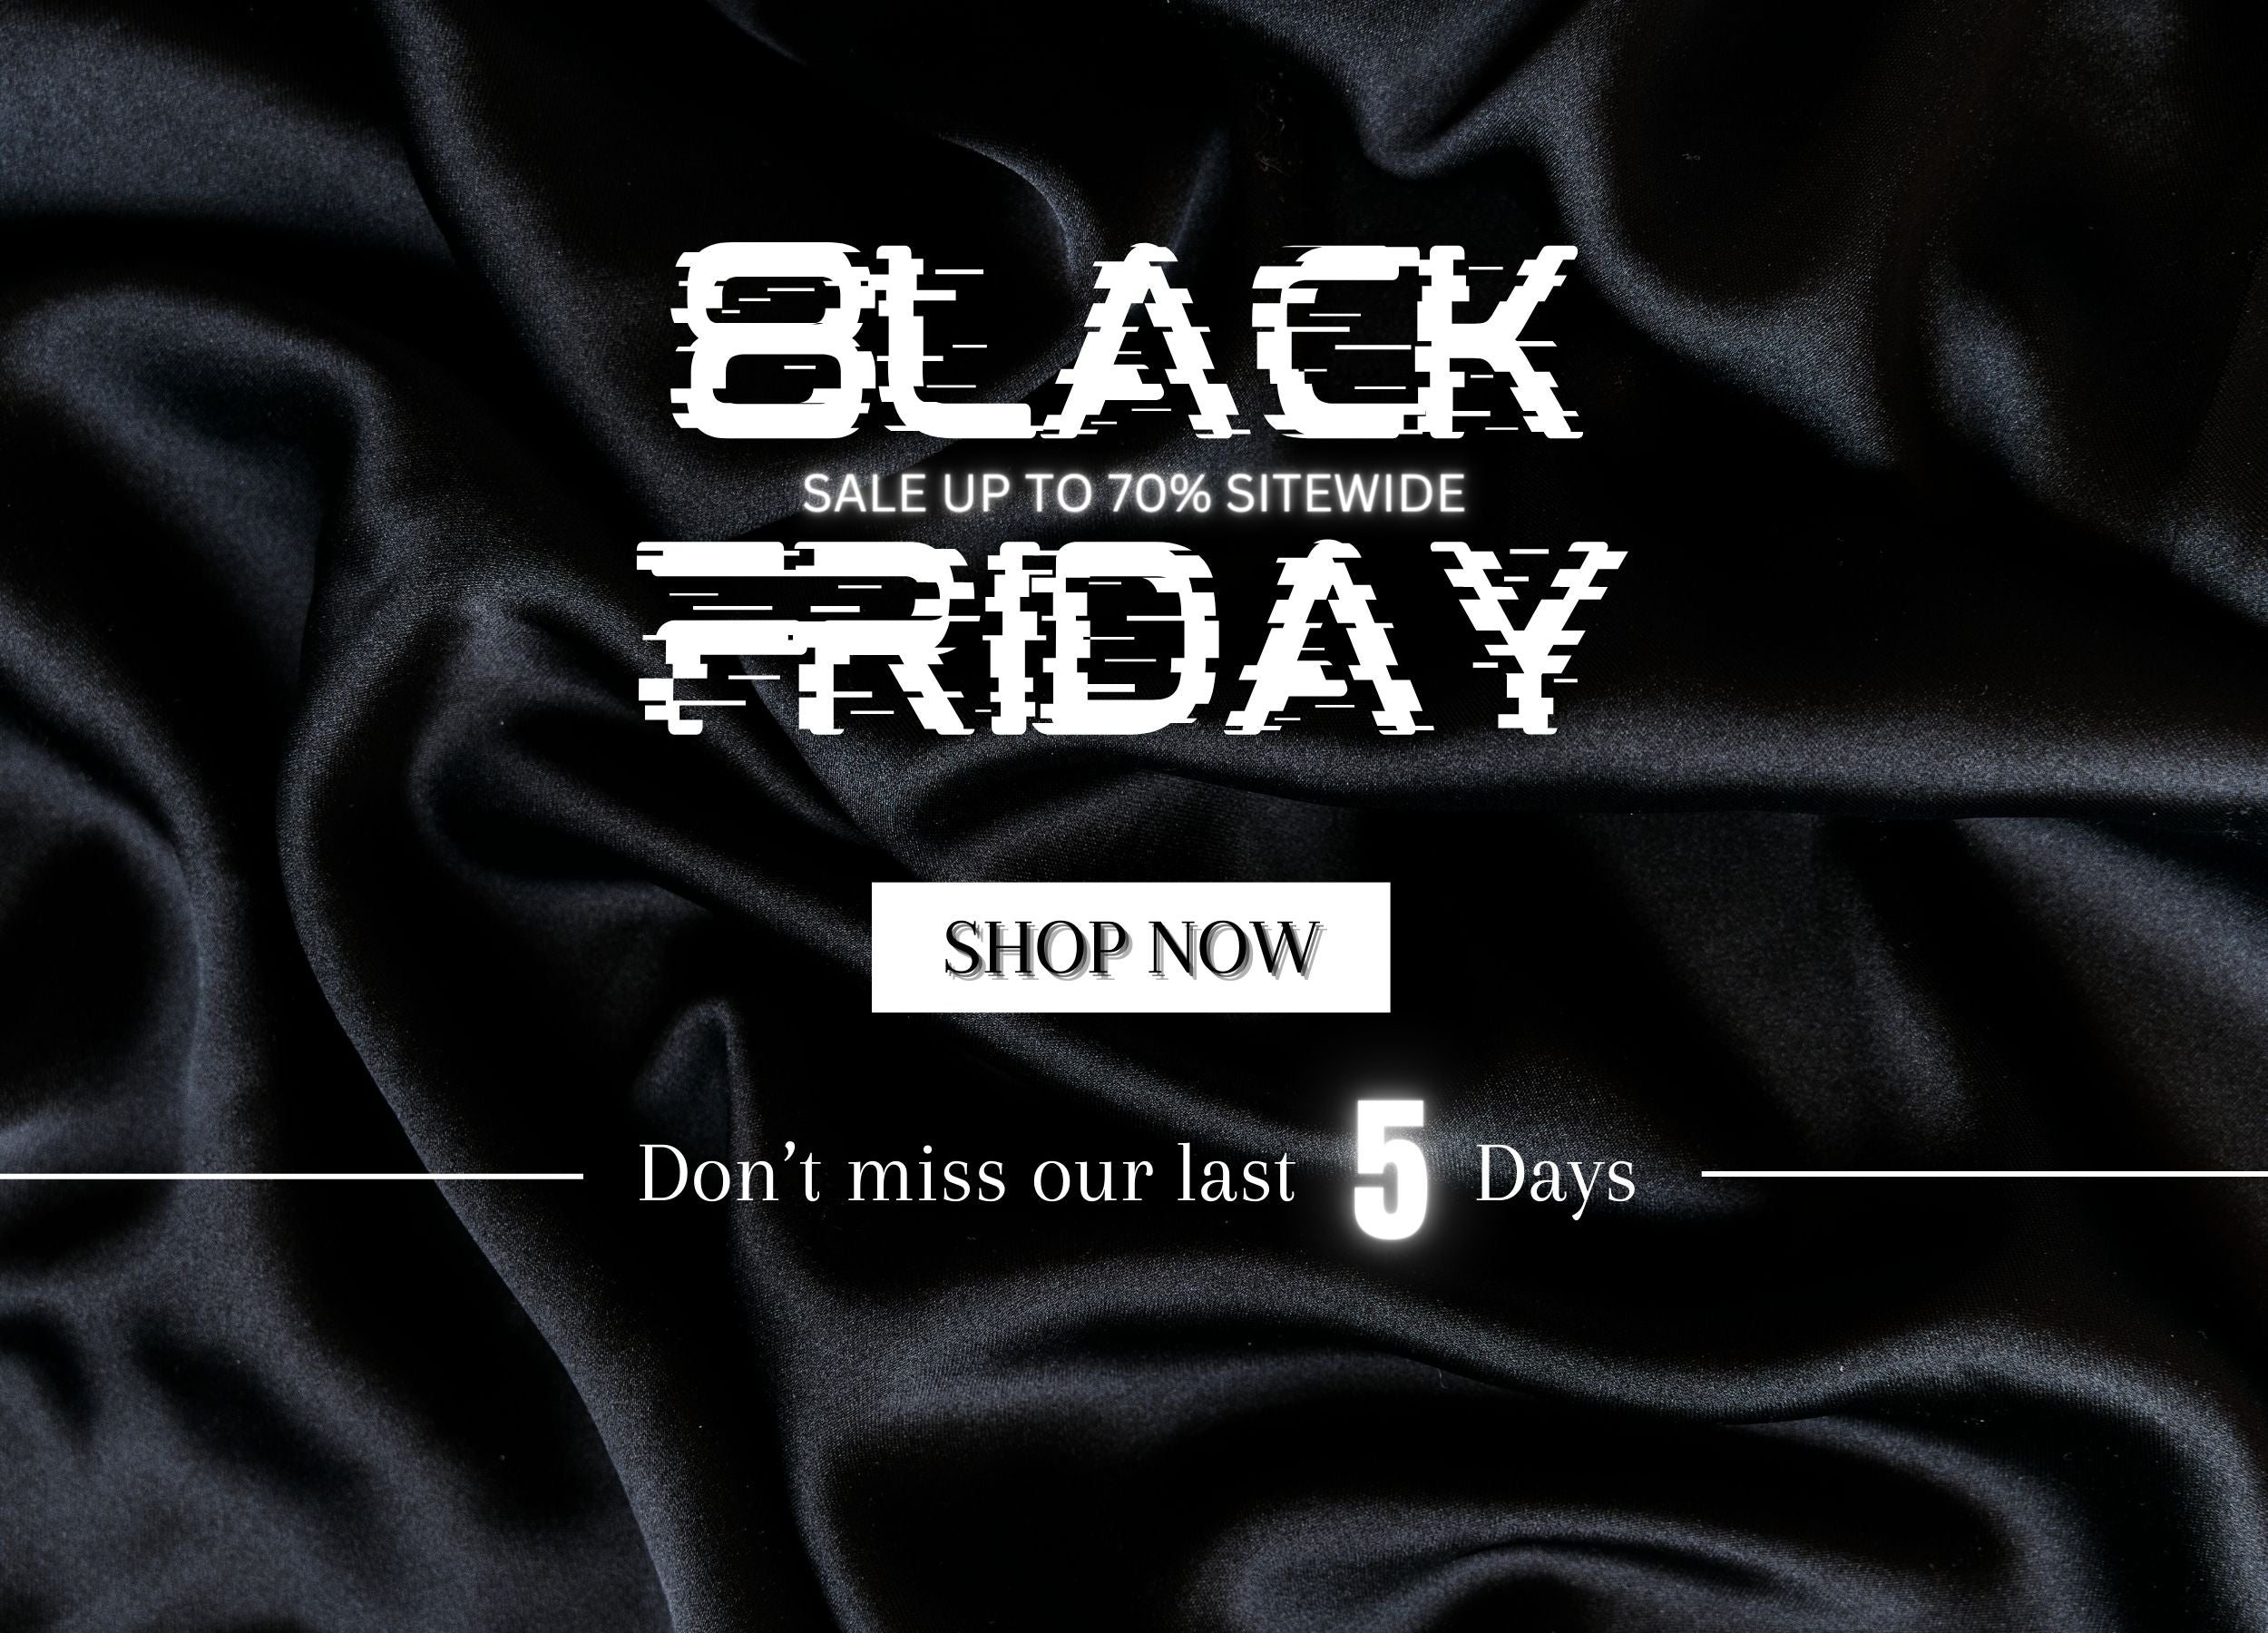 Black Friday Sale Up To 70% On All Black Clothing Collection